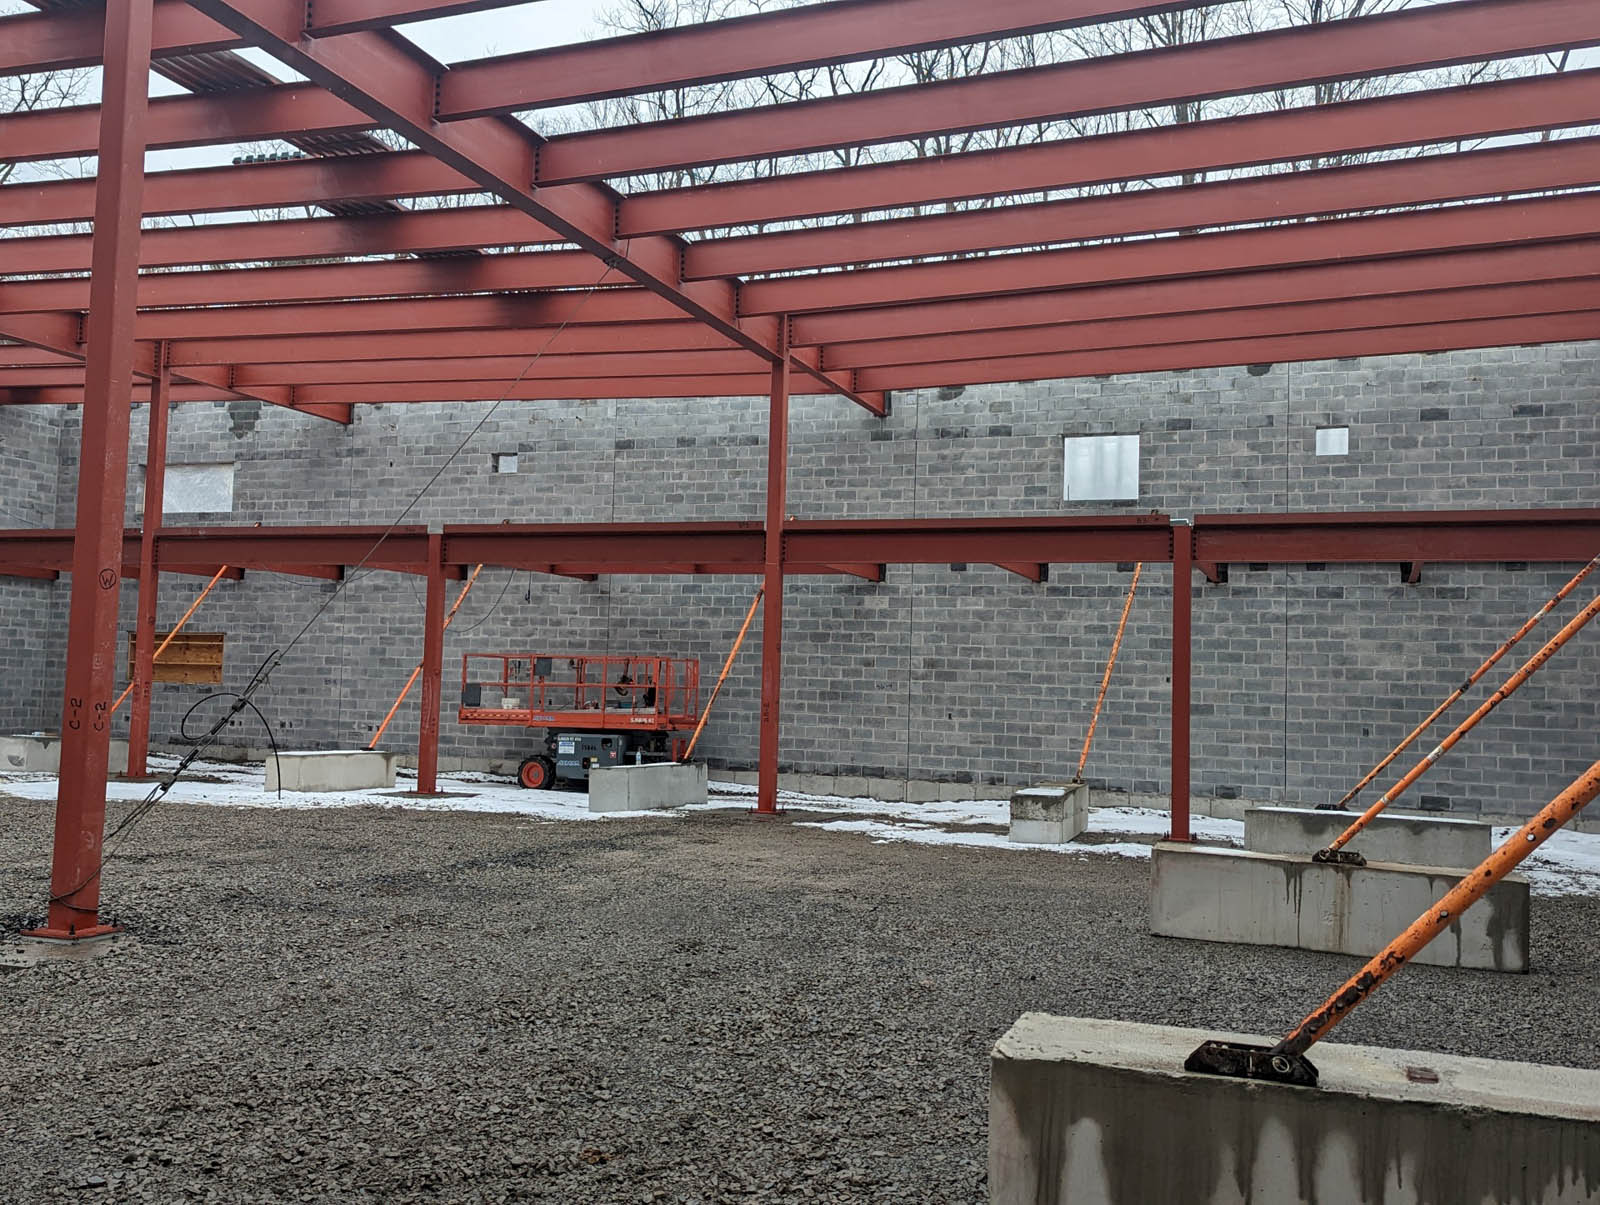 March 13, 2023 - Roof Steel